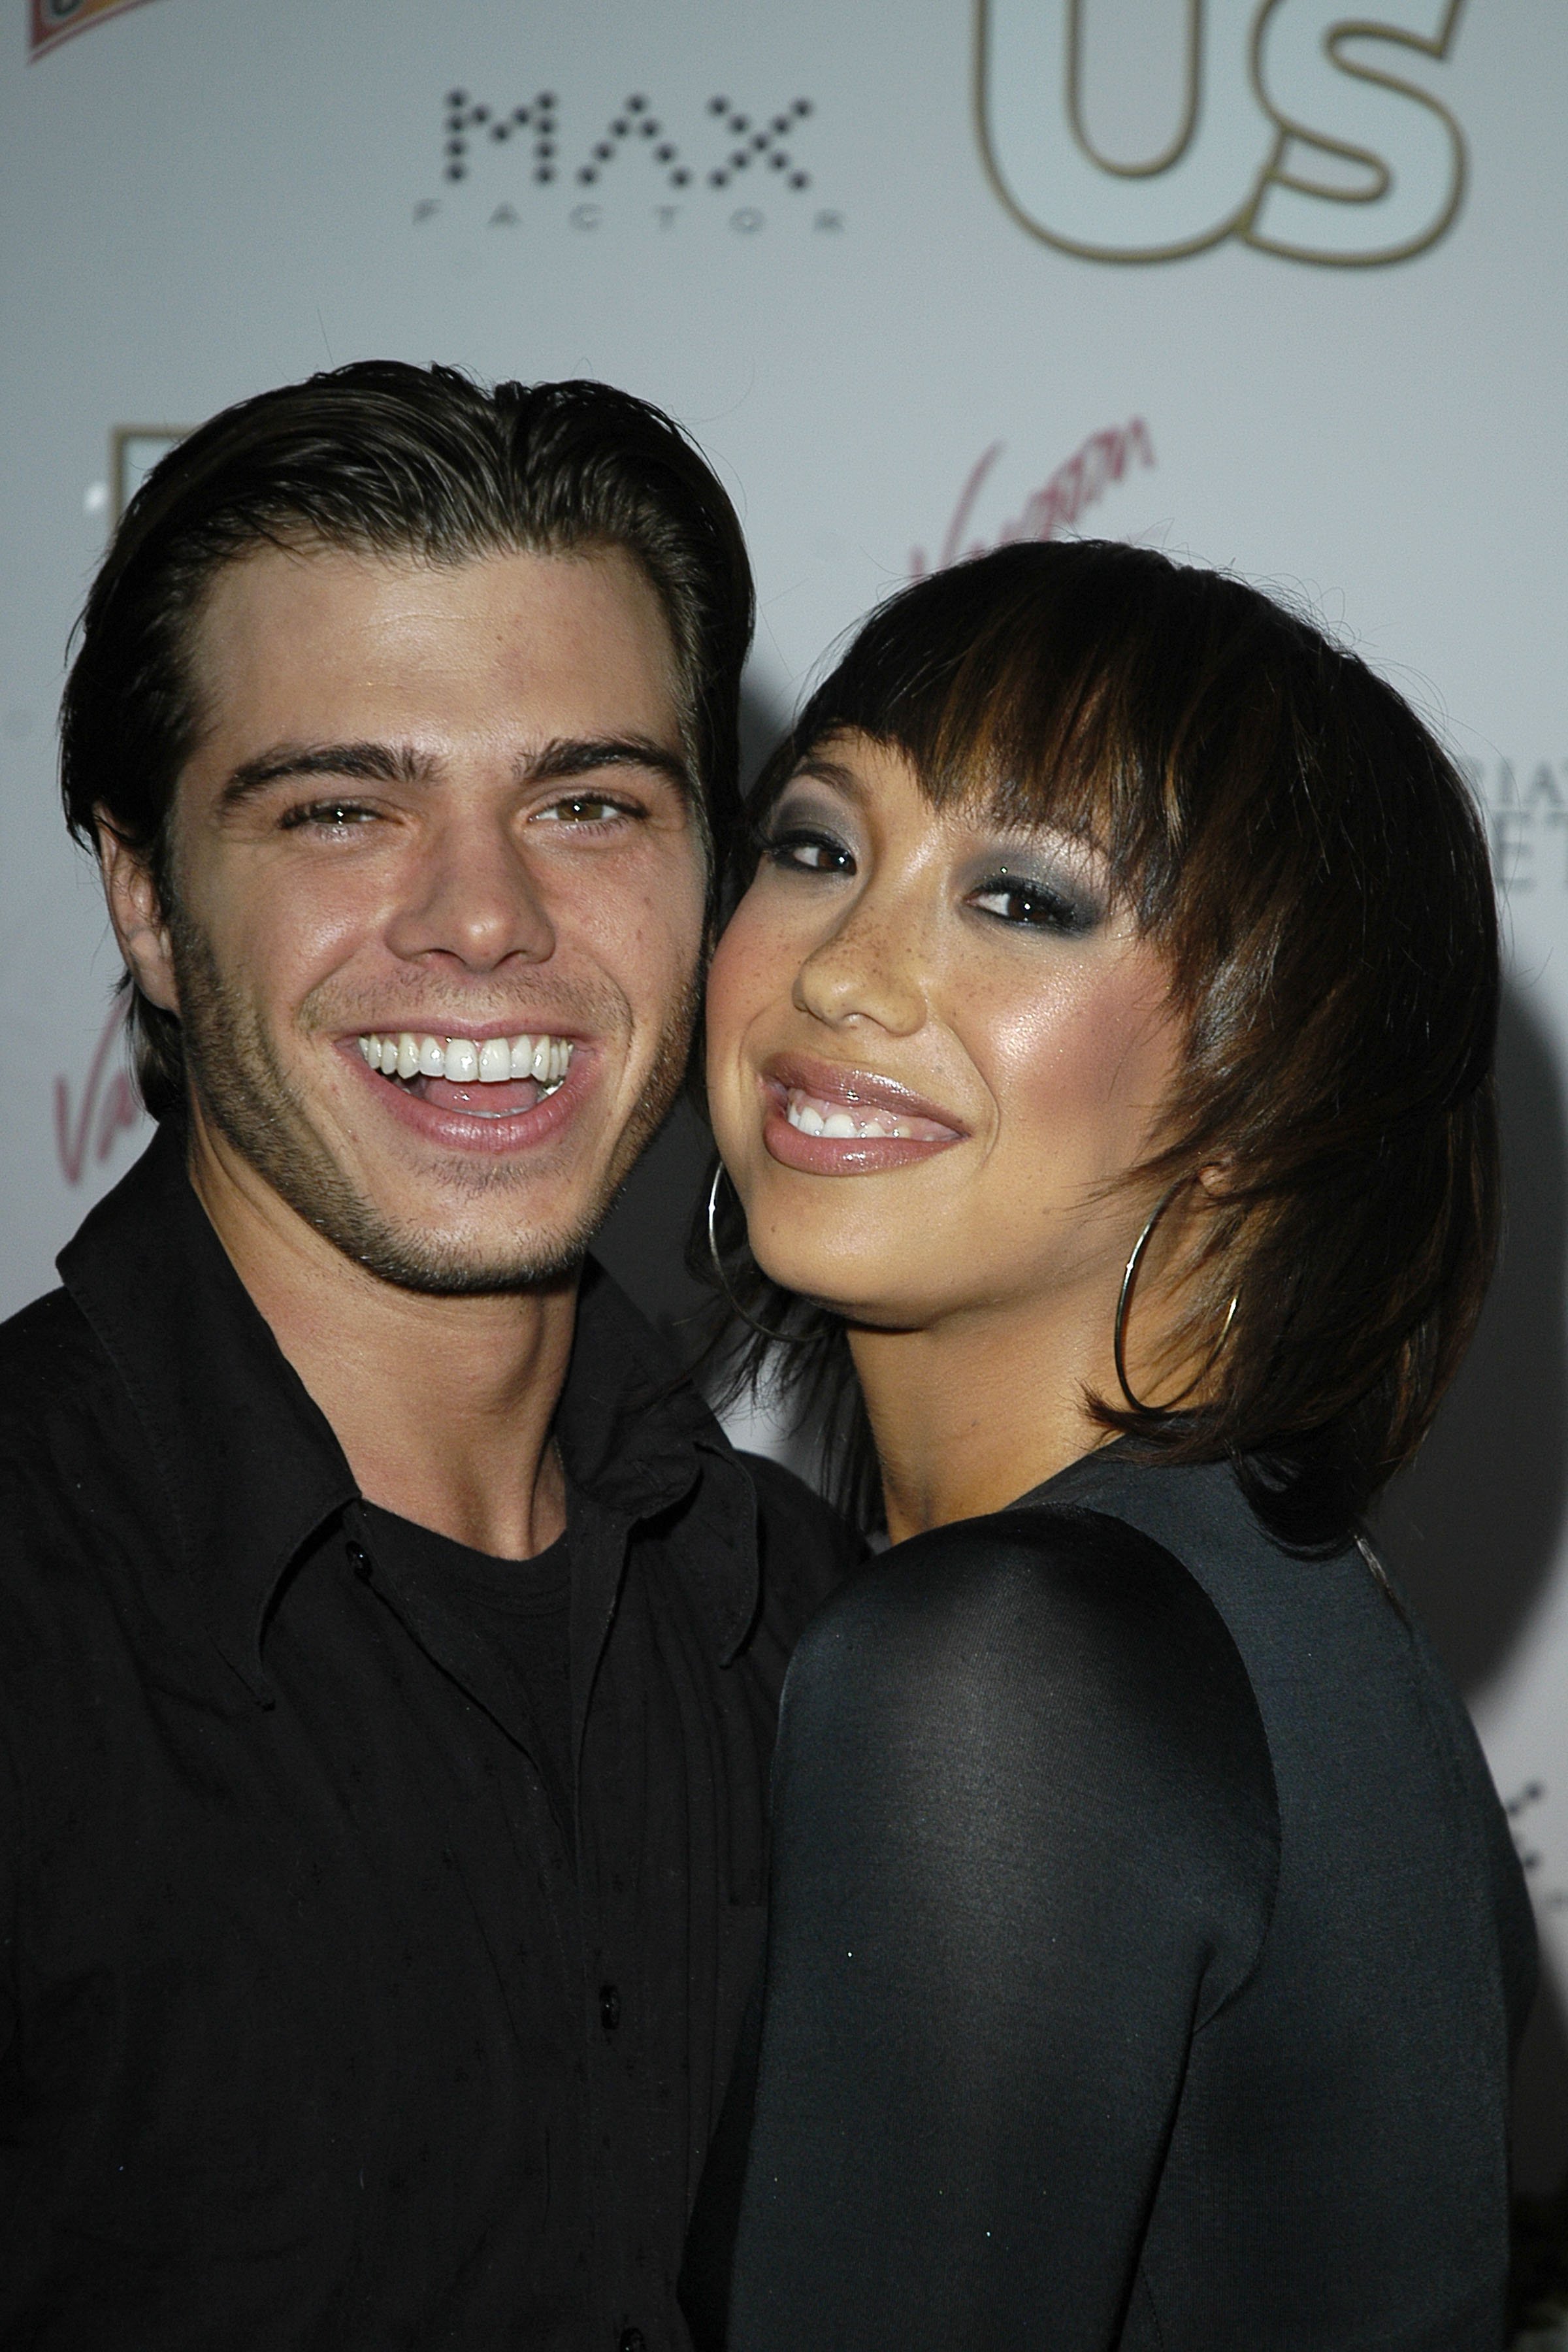 Matthew Lawrence and Cheryl Burke at the US Weekly Presents US' Hot Hollywood 2007 on April 26, 2007 | Source: Getty Images